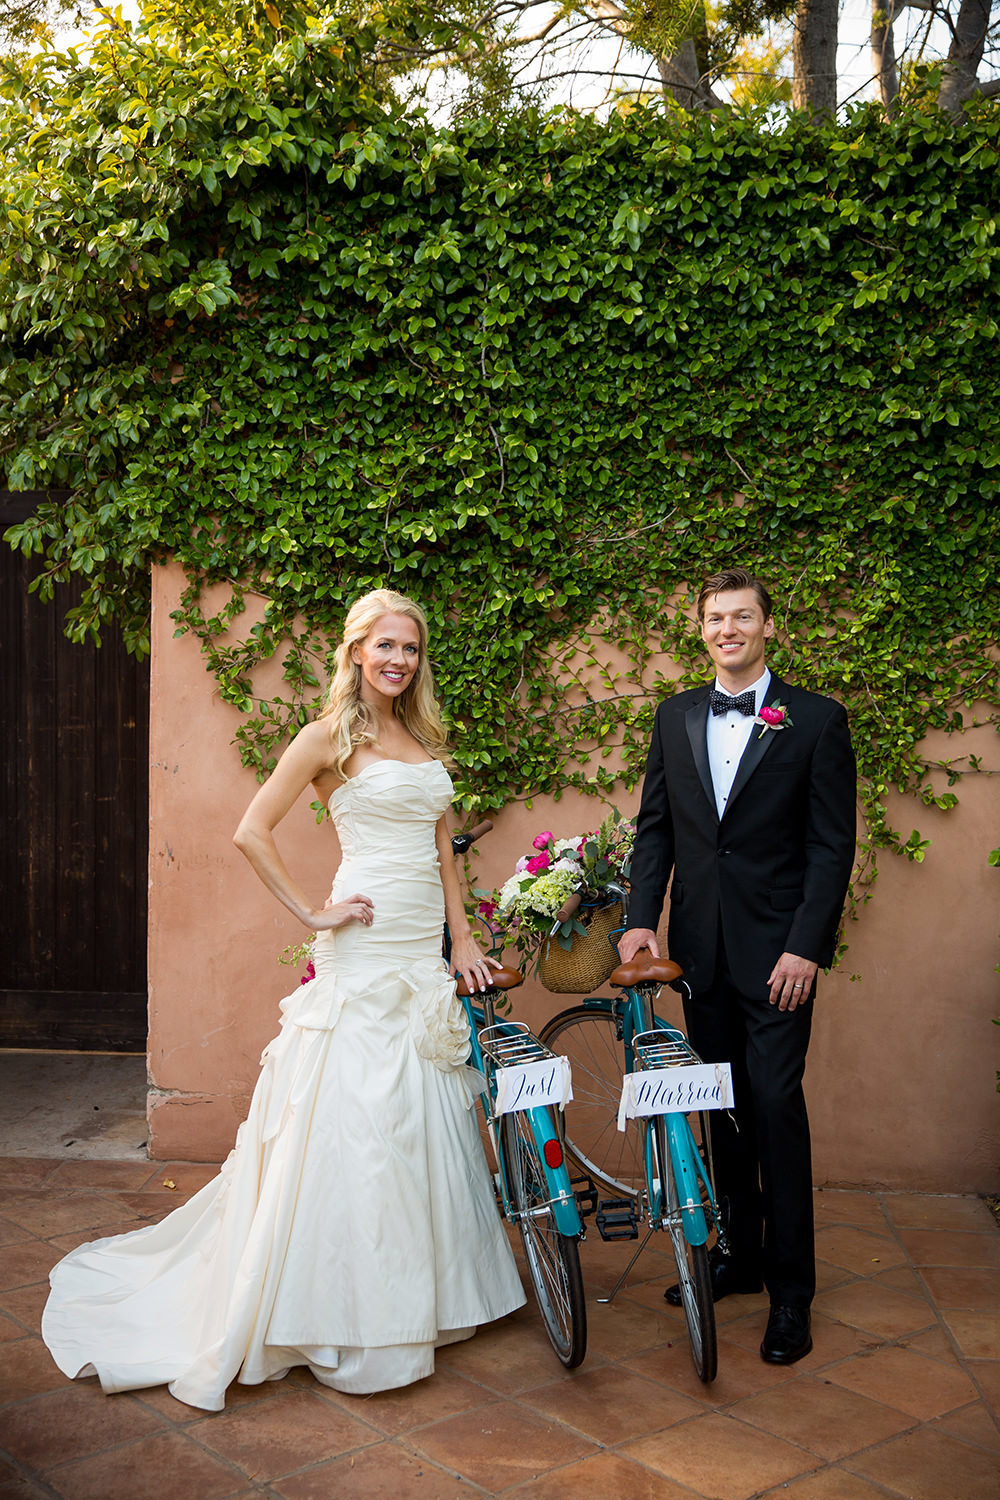 Cute Portrait of Wedding Couple with Bicycles